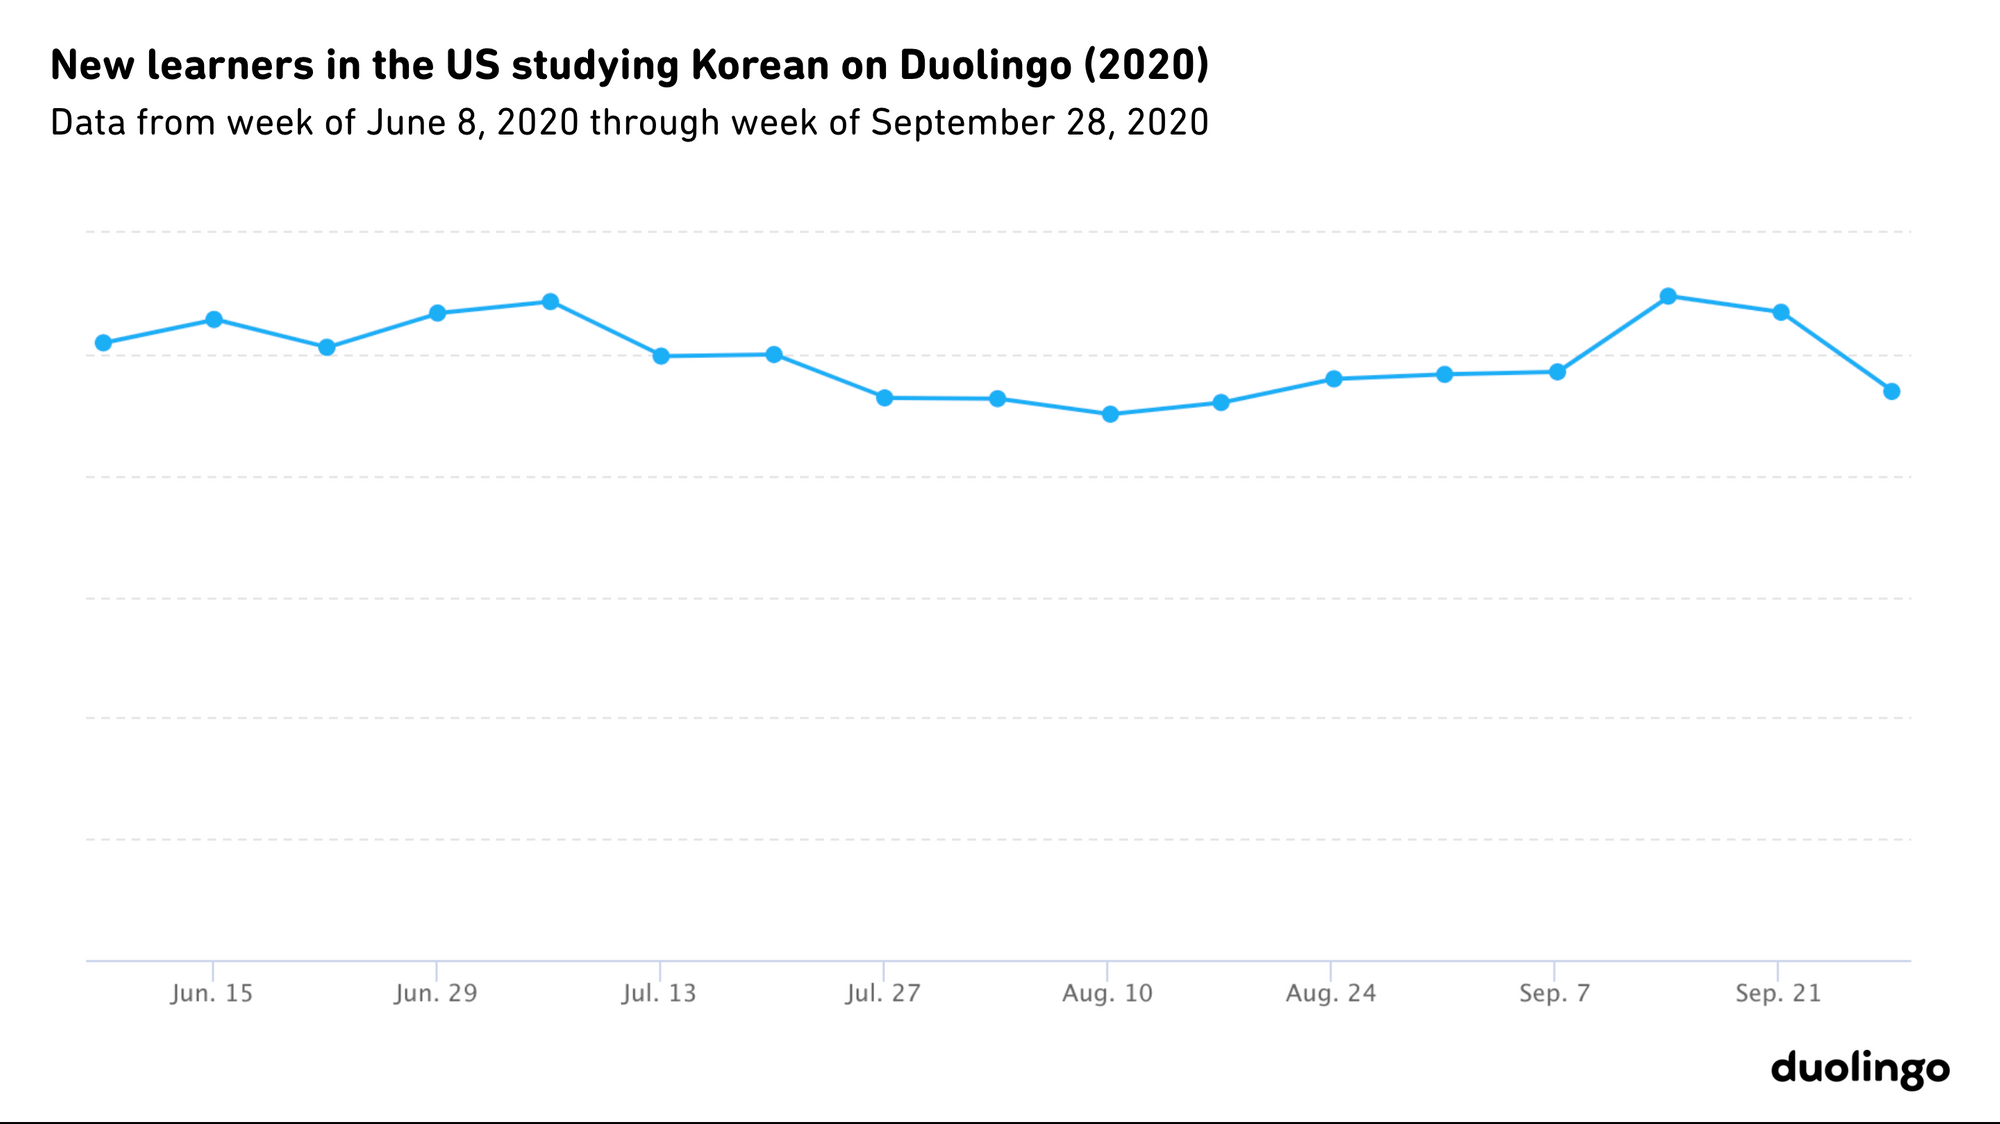 Graph of new US learners studying Korean on Duolingo in 2021